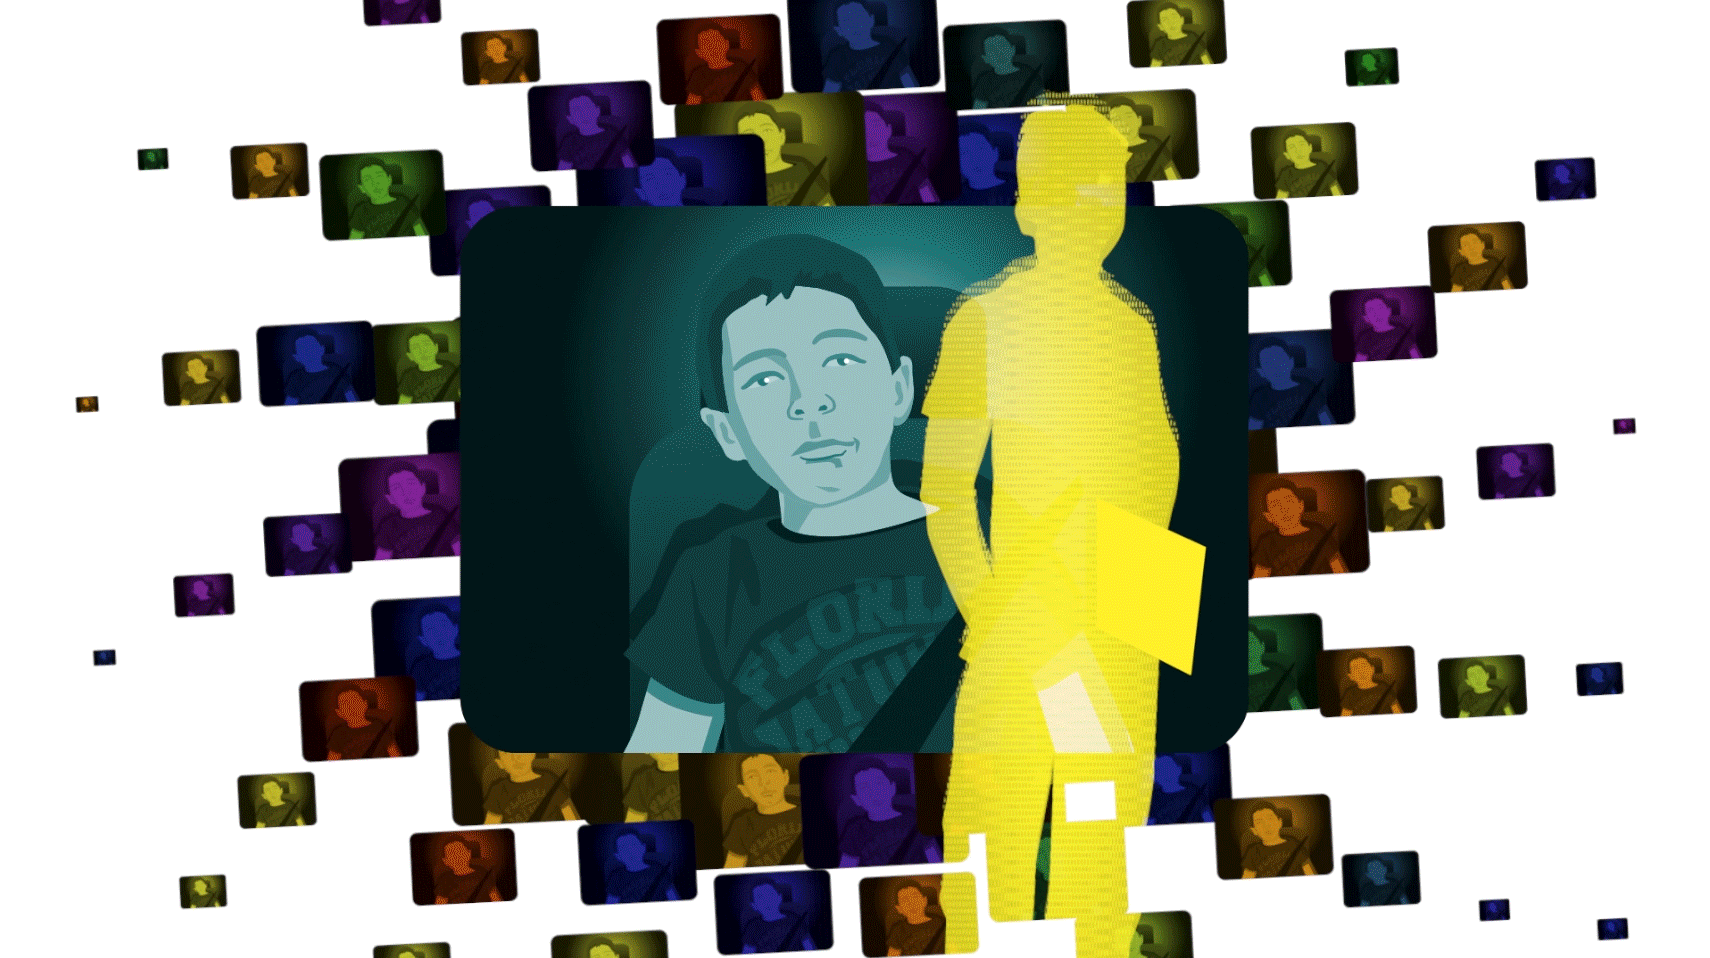 An illustration of the “David After Dentist” video, showing a boy loopy from taking medicine and a silhouette of him as a teenager.